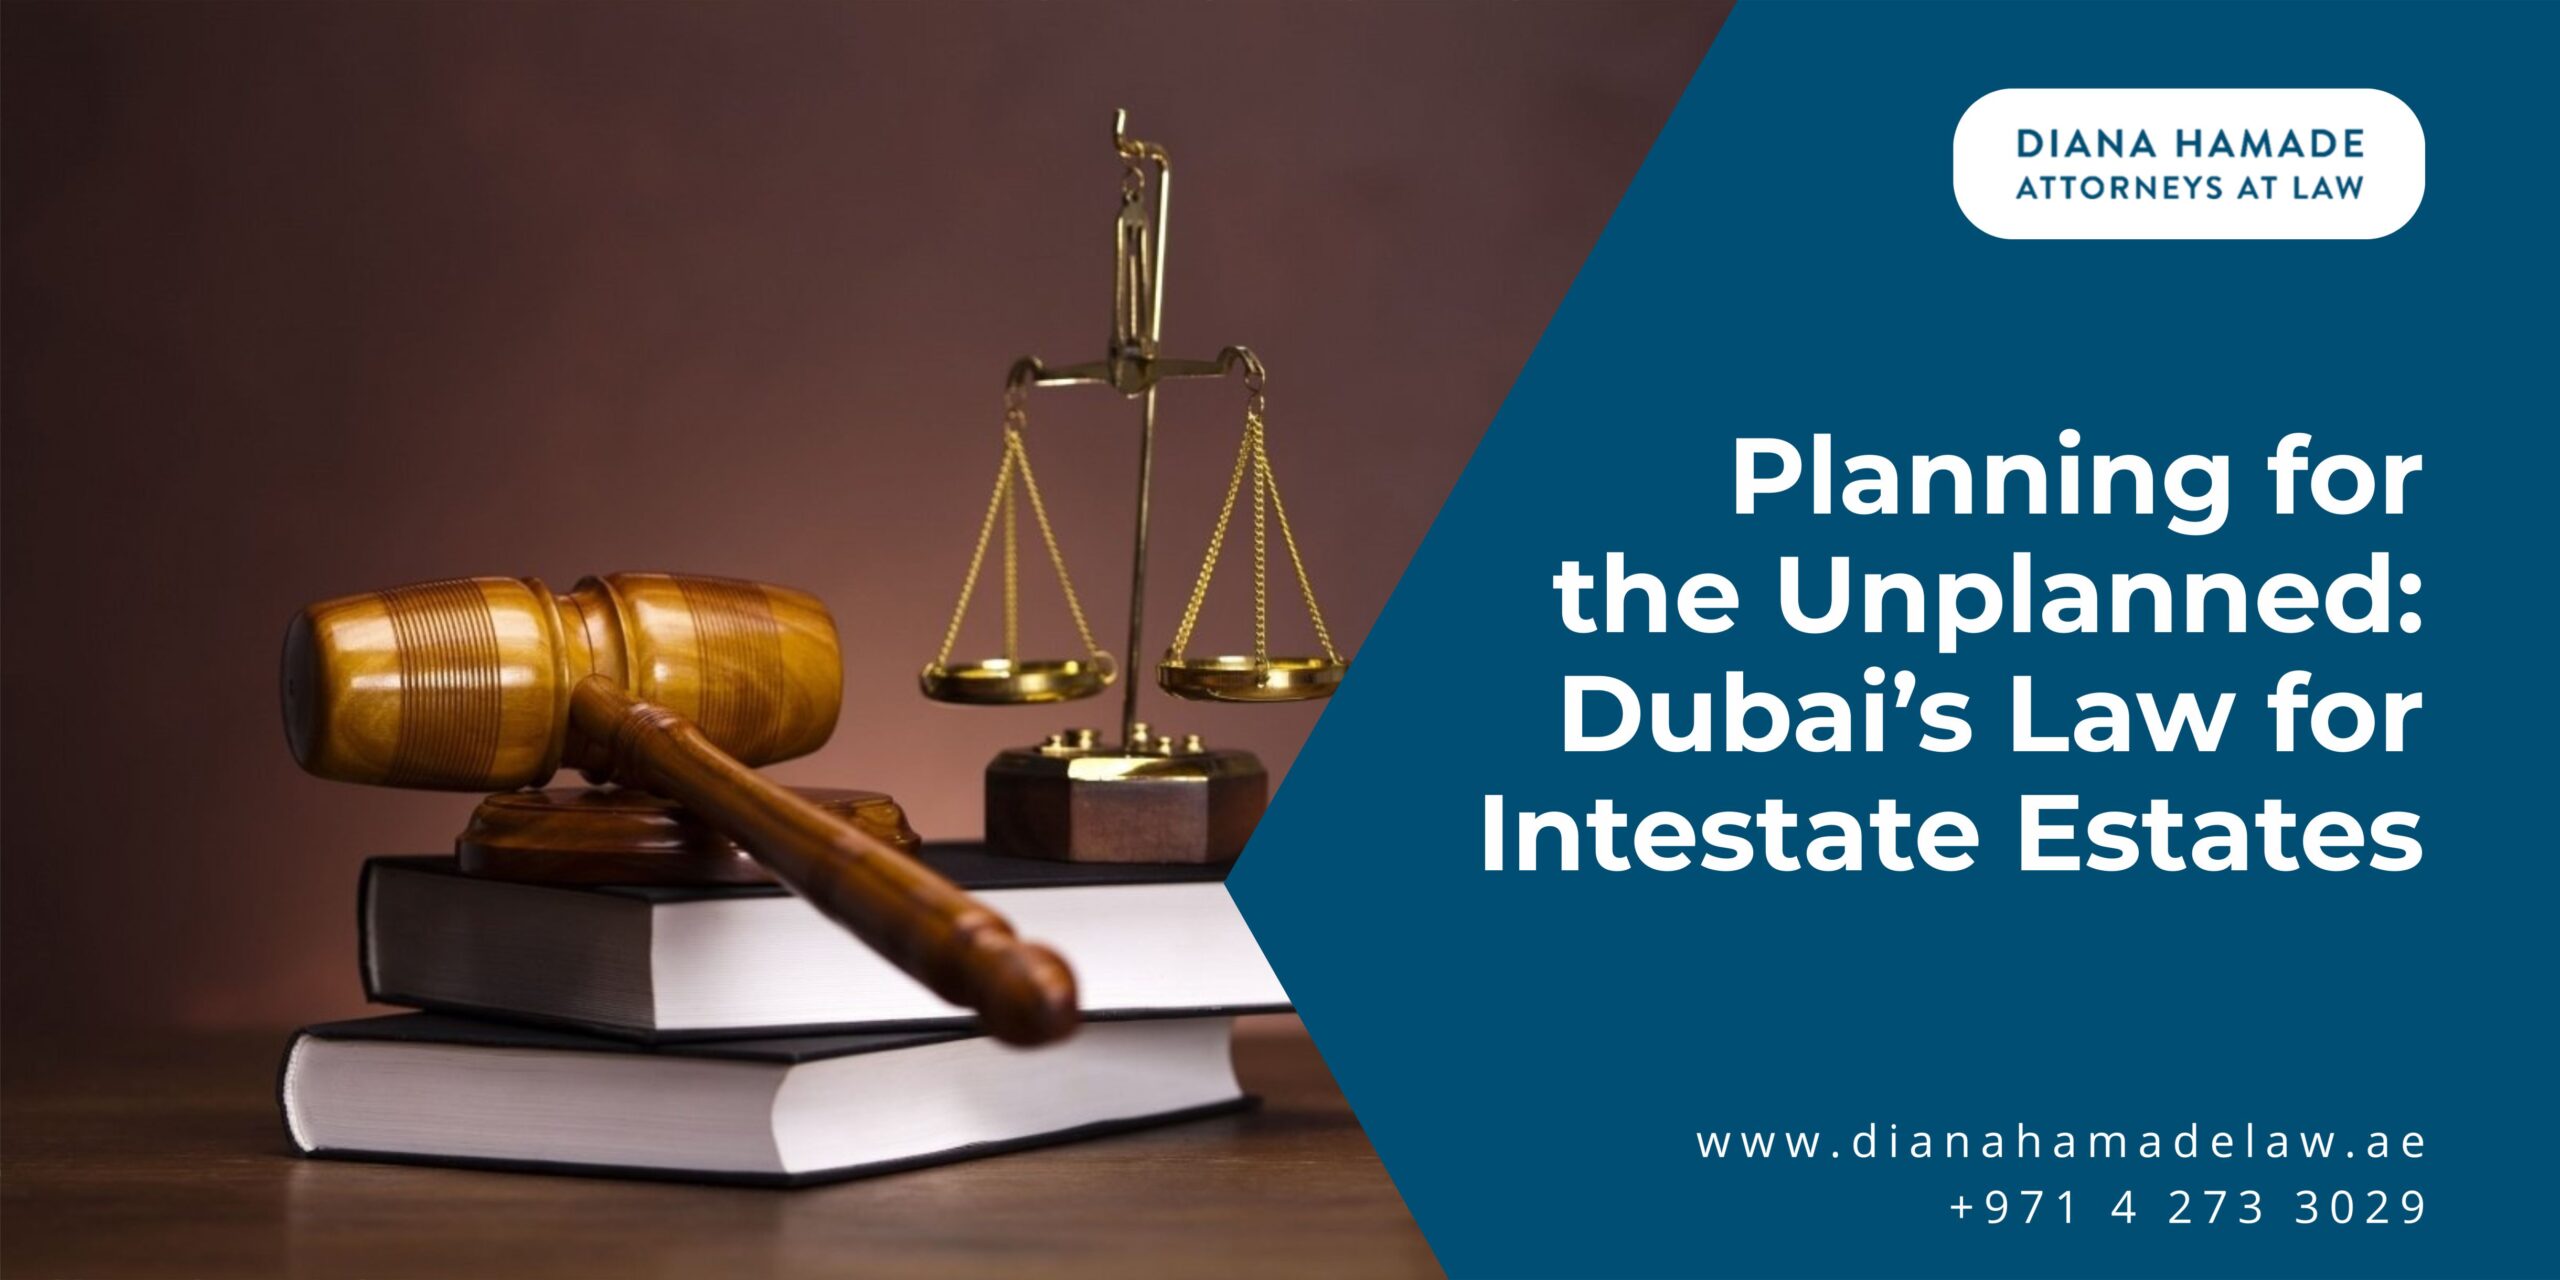 Planning for the Unplanned: Dubai’s Law for Intestate Estates